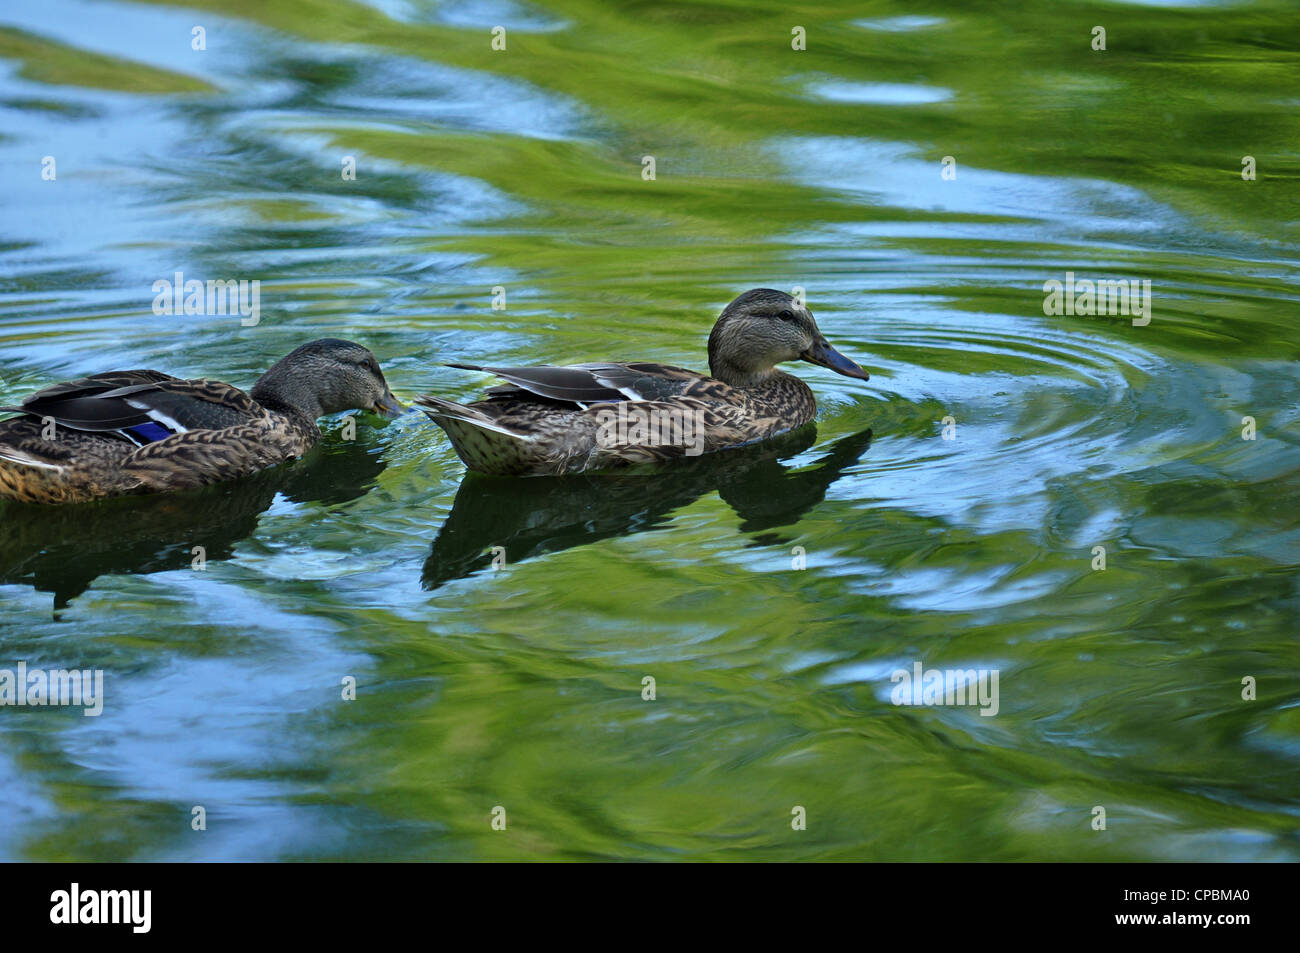 two female wood ducks swimming in blue and green reflecting pond water Stock Photo